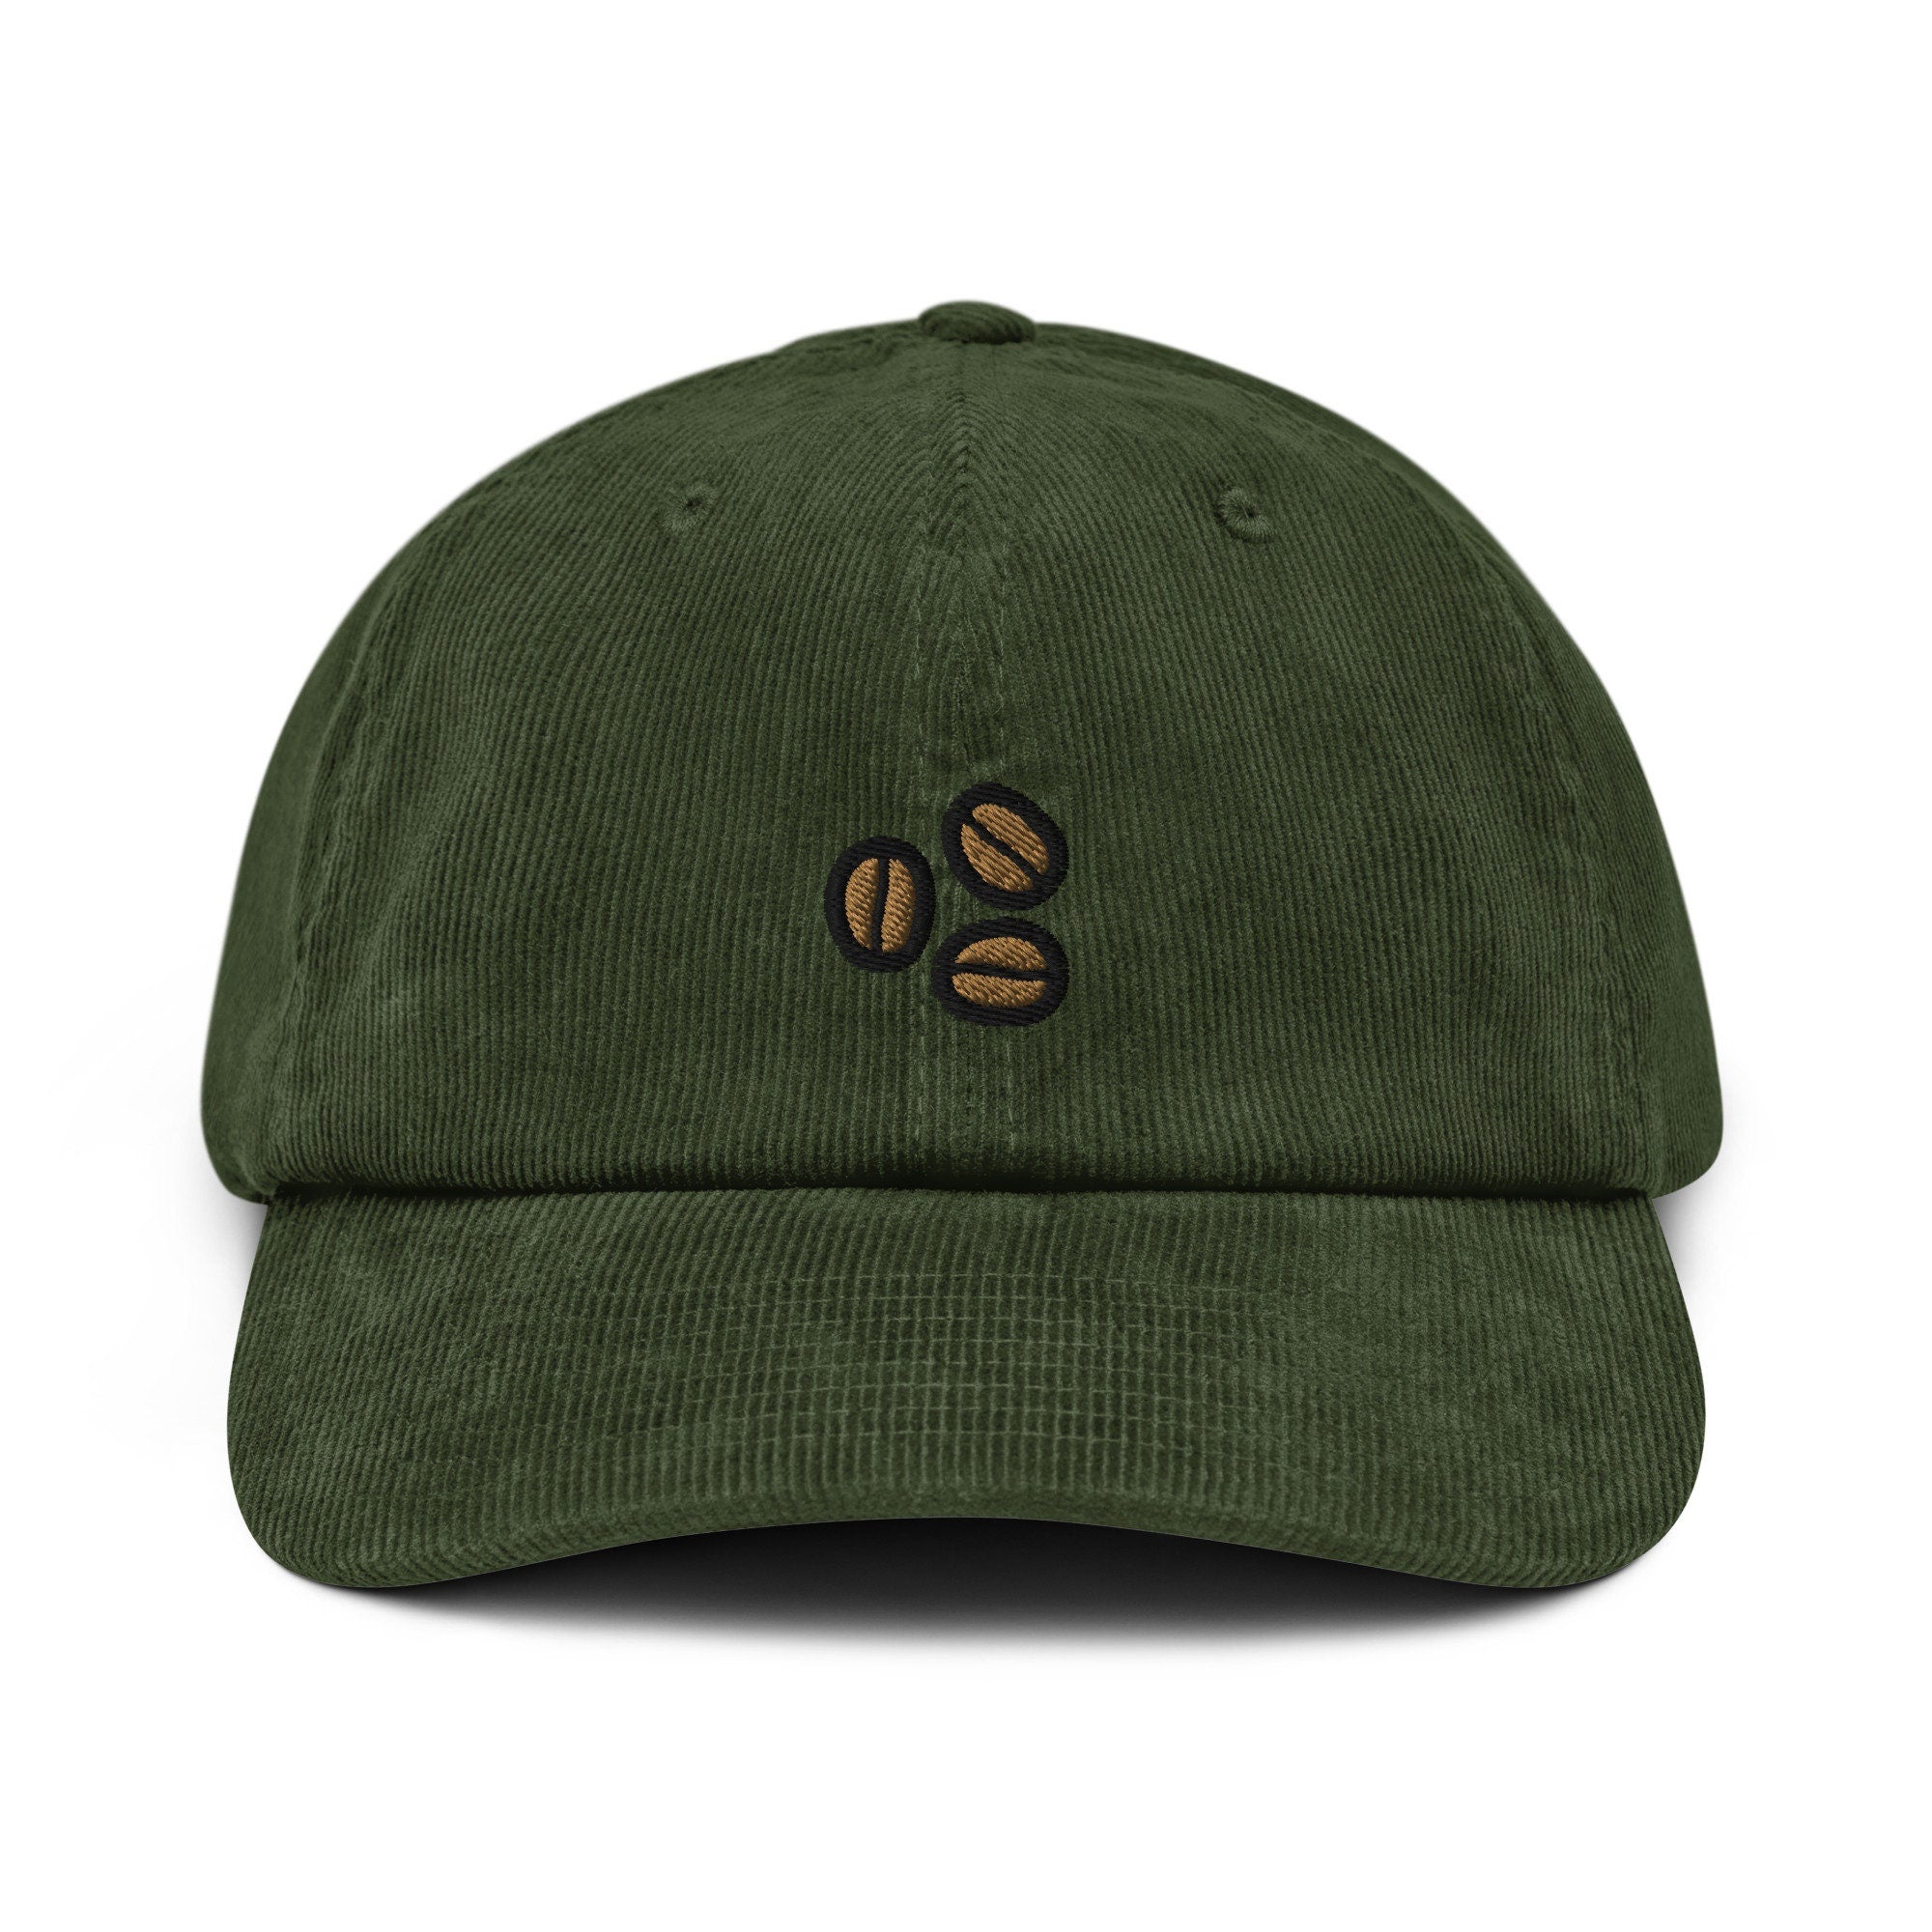 Coffee Beans Corduroy Hat, Handmade Embroidered Corduroy Dad Cap - Multiple Colors